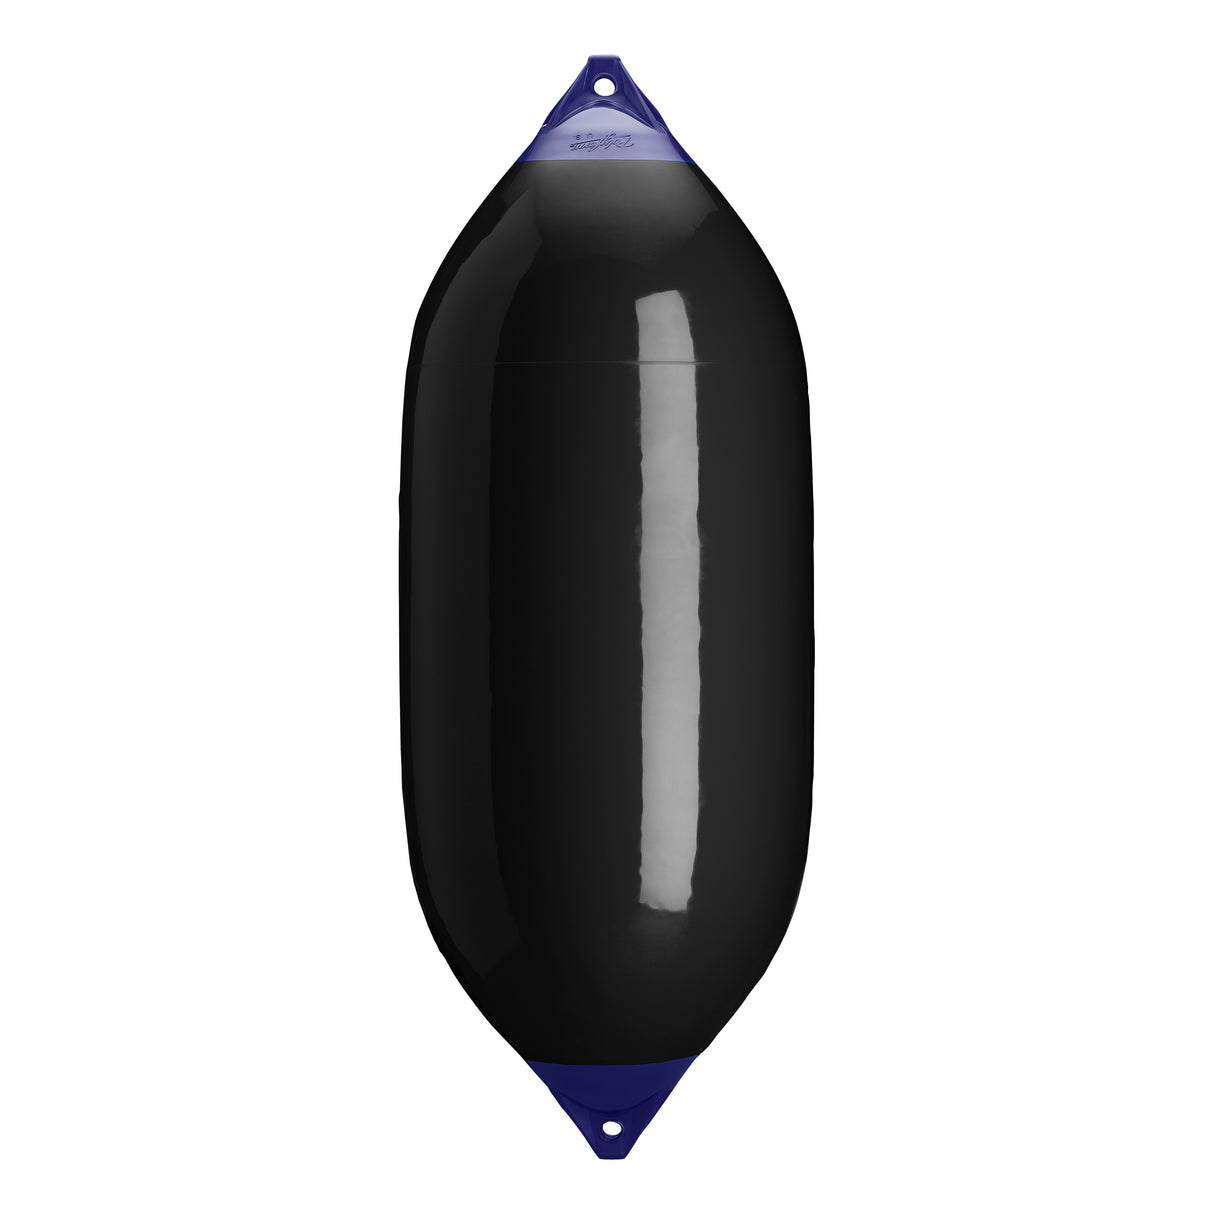 Black boat fender with Navy-Top, Polyform F-13 